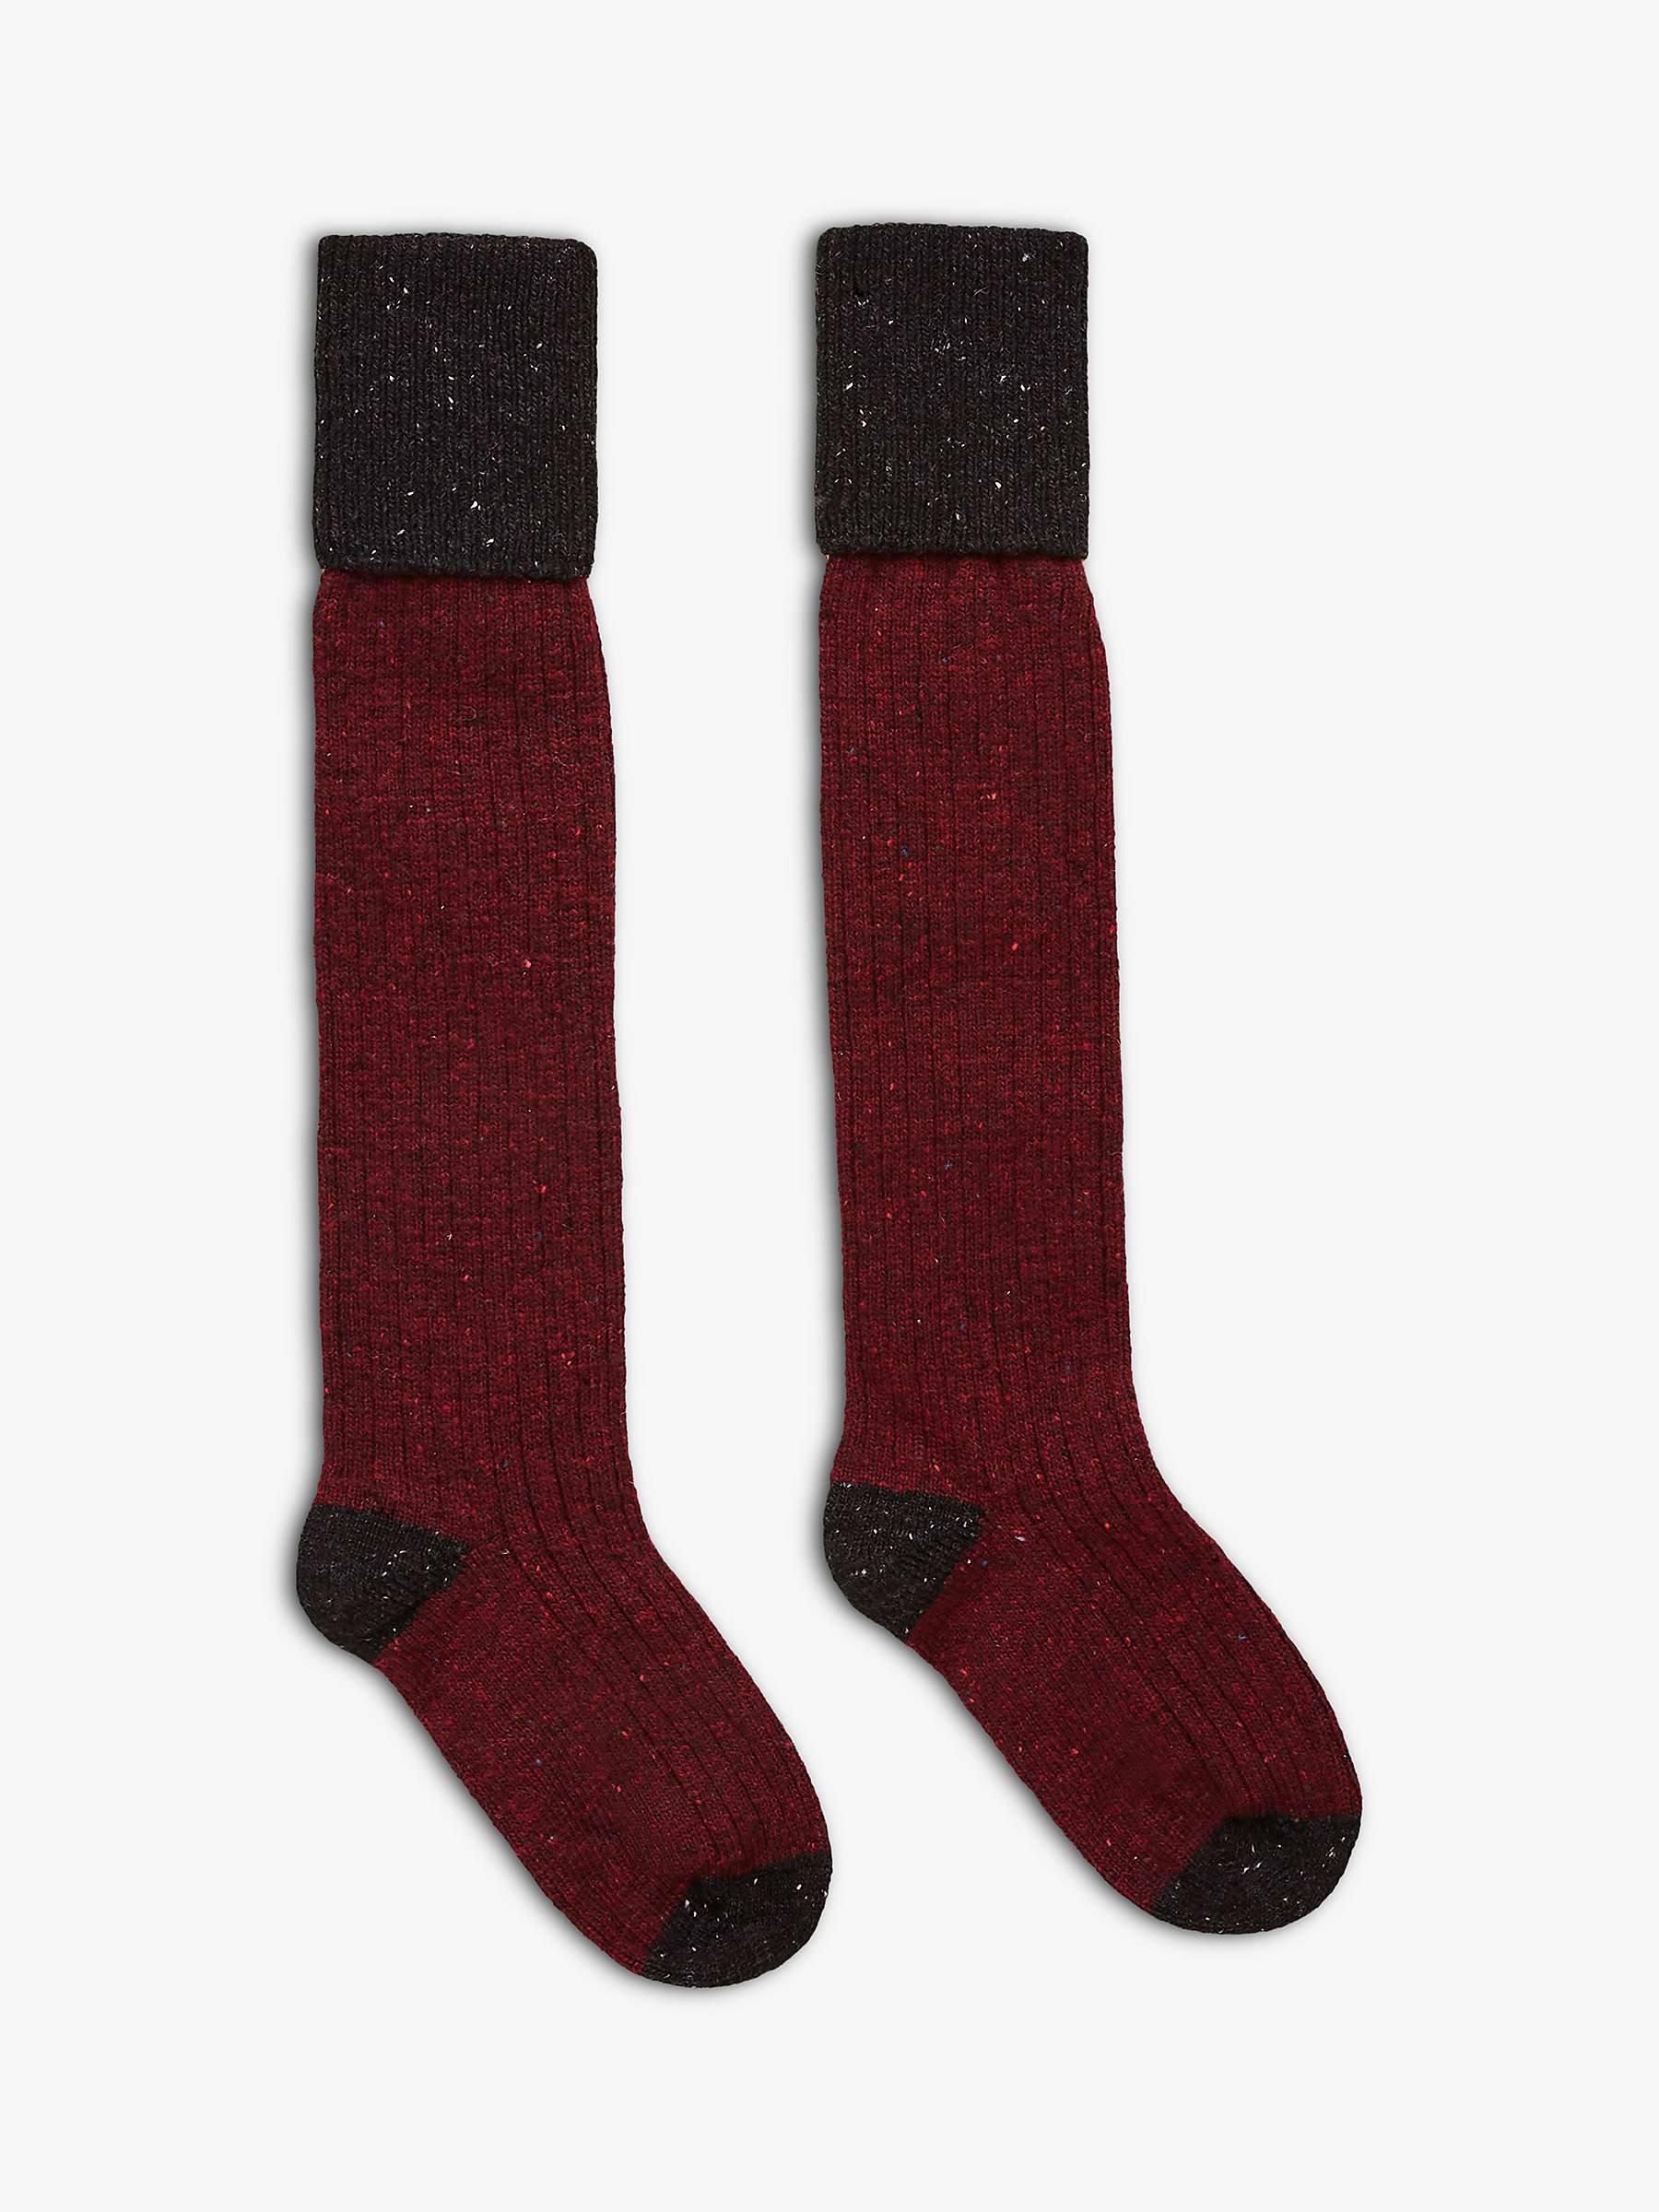 Buy Celtic & Co. Wool Cashmere and Silk Knee High Ribbed Socks, Claret Online at johnlewis.com